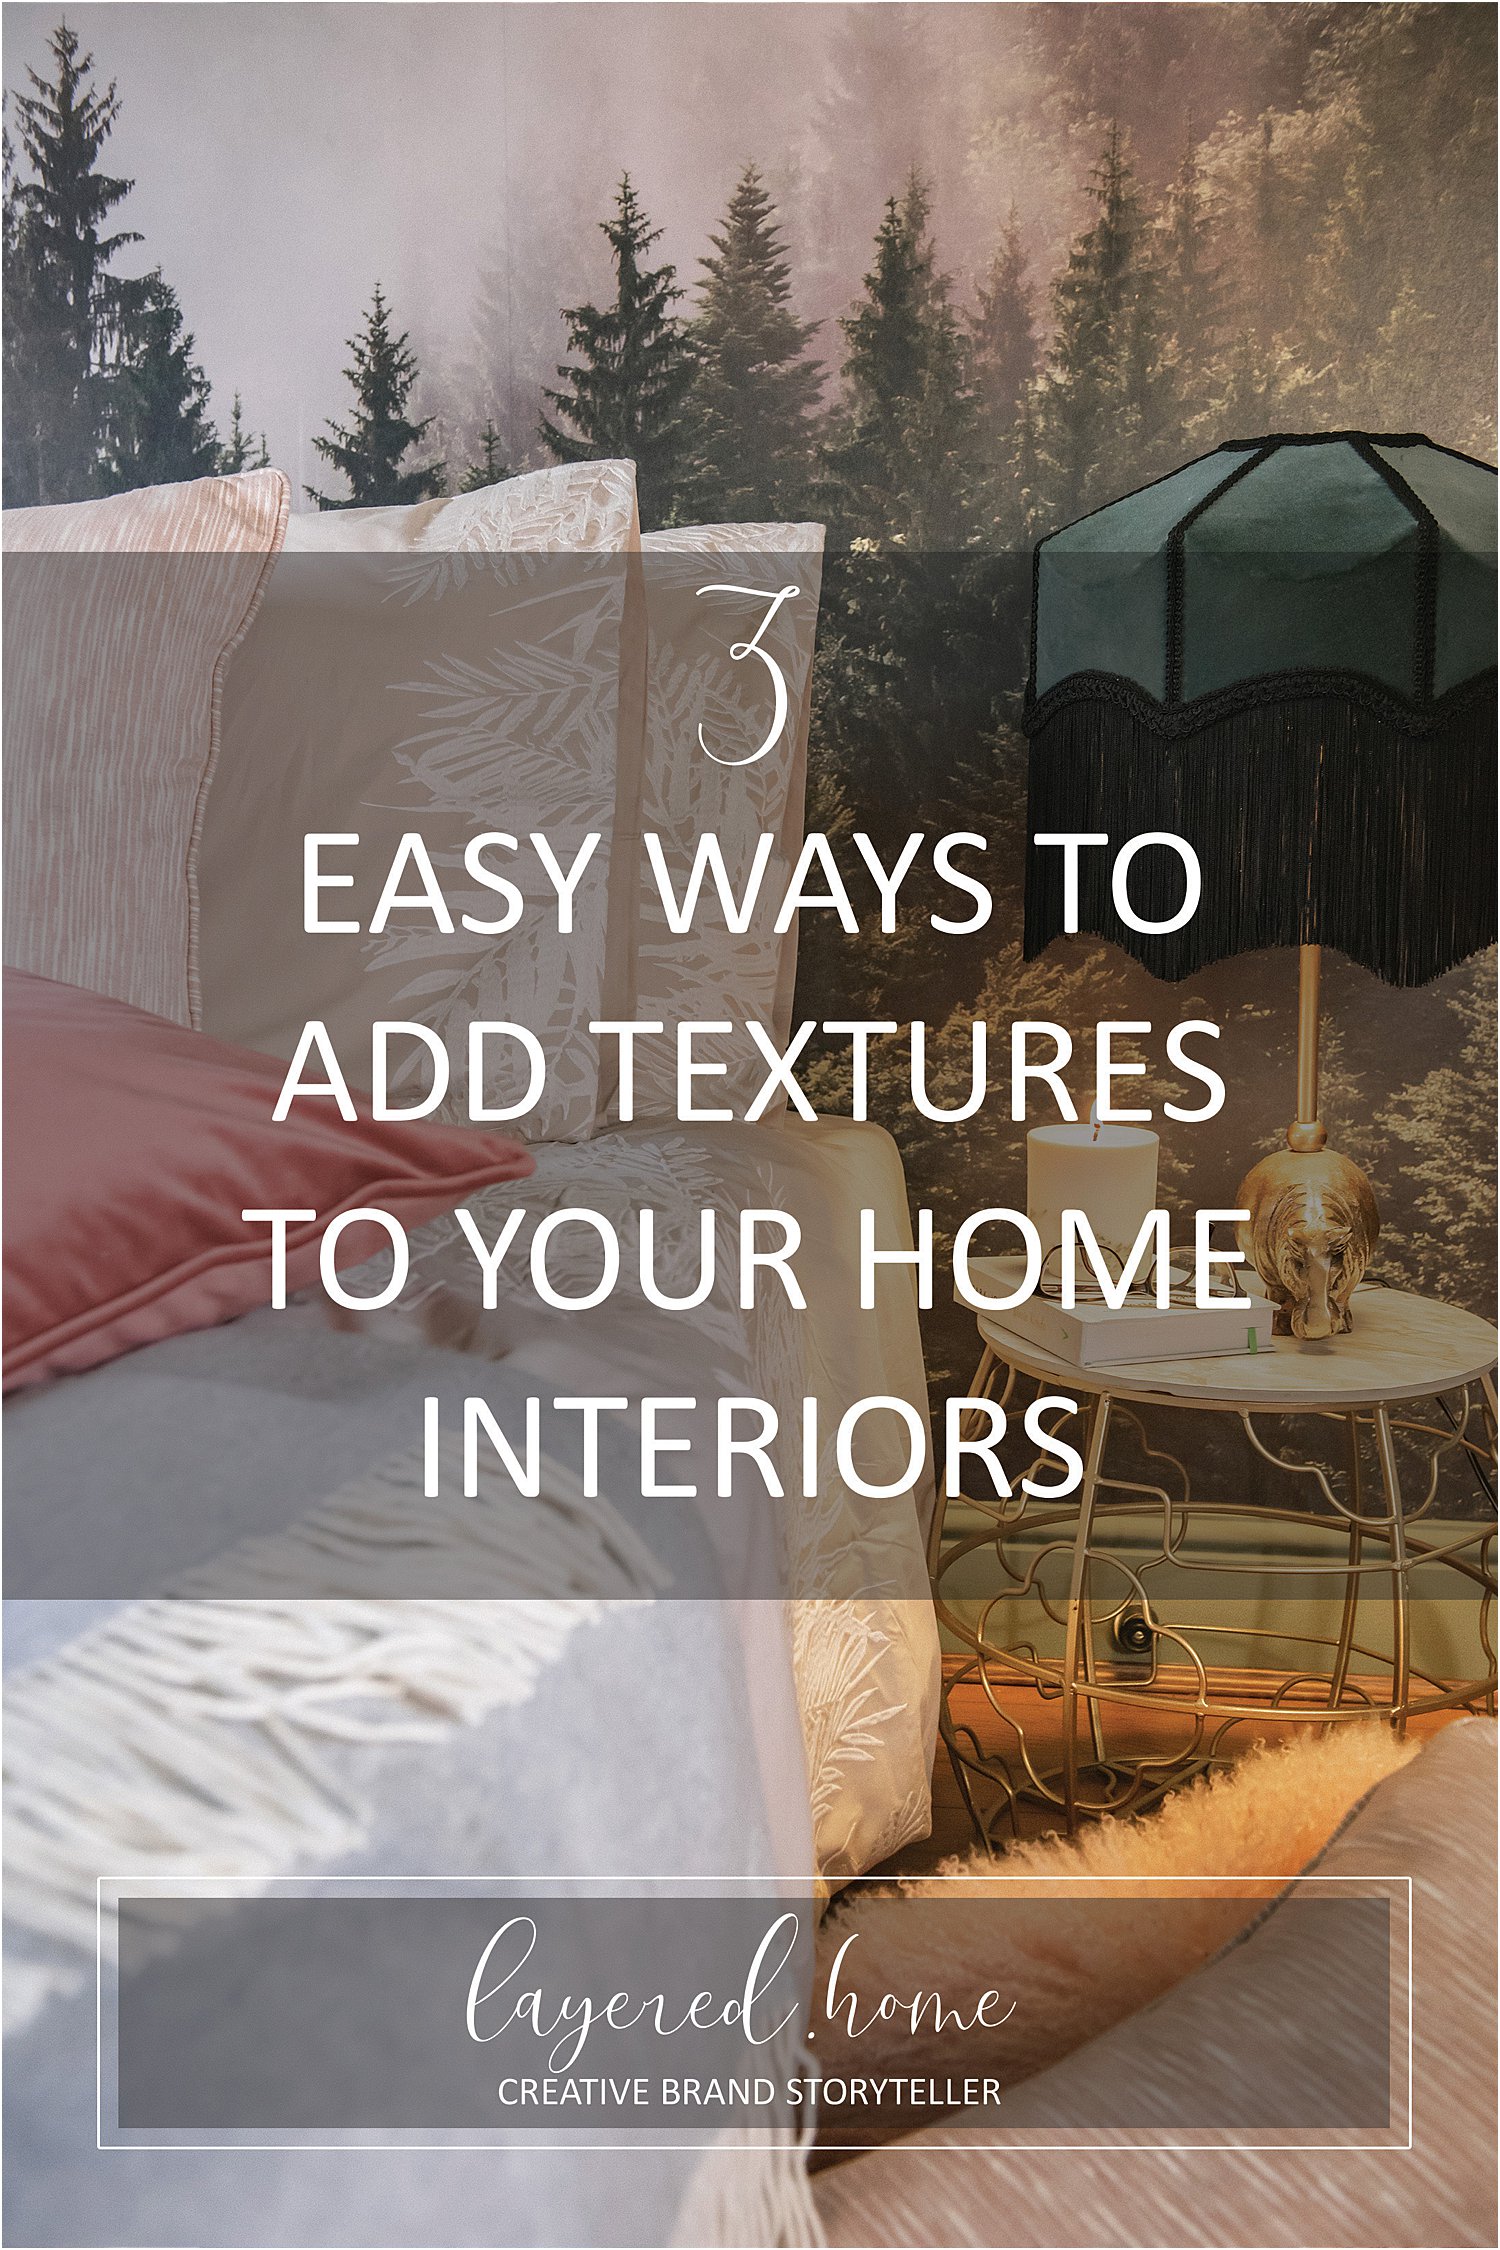 3-easy-ways-to-add-textures-to-your-home-interiors